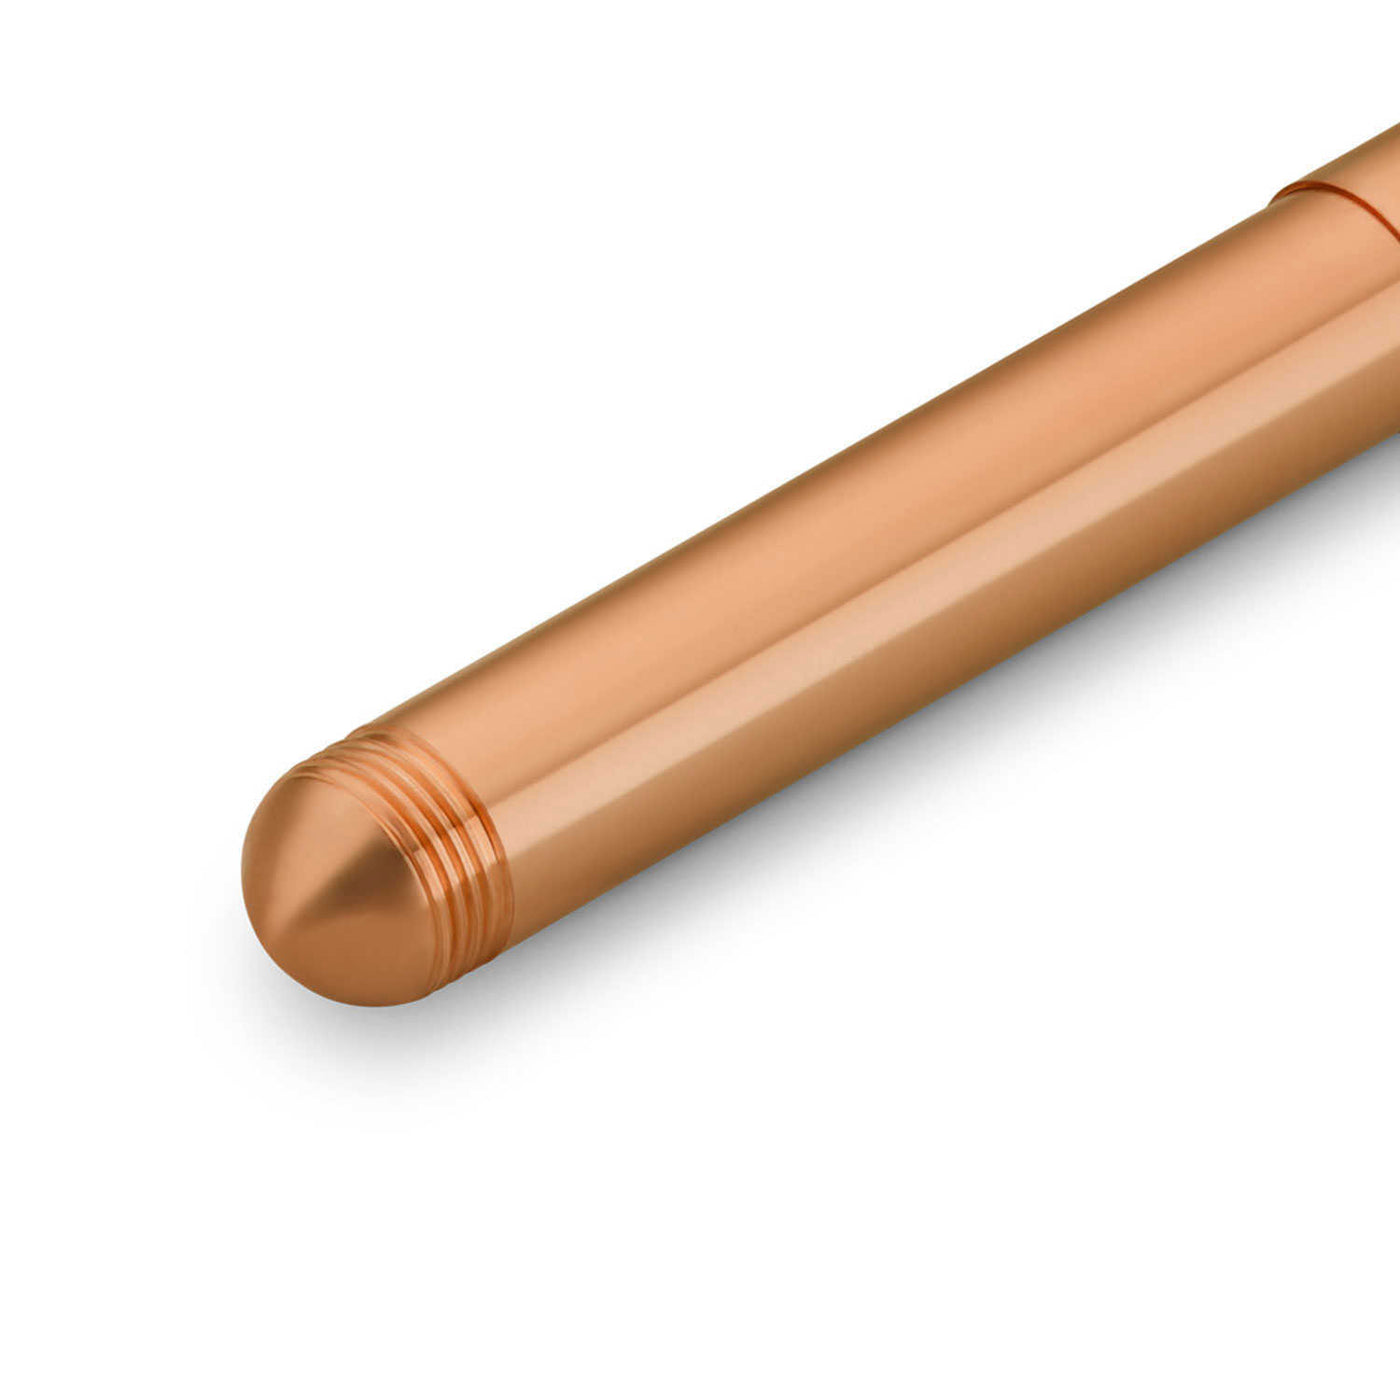 Kaweco Liliput Fountain Pen with Optional Clip - Copper 4